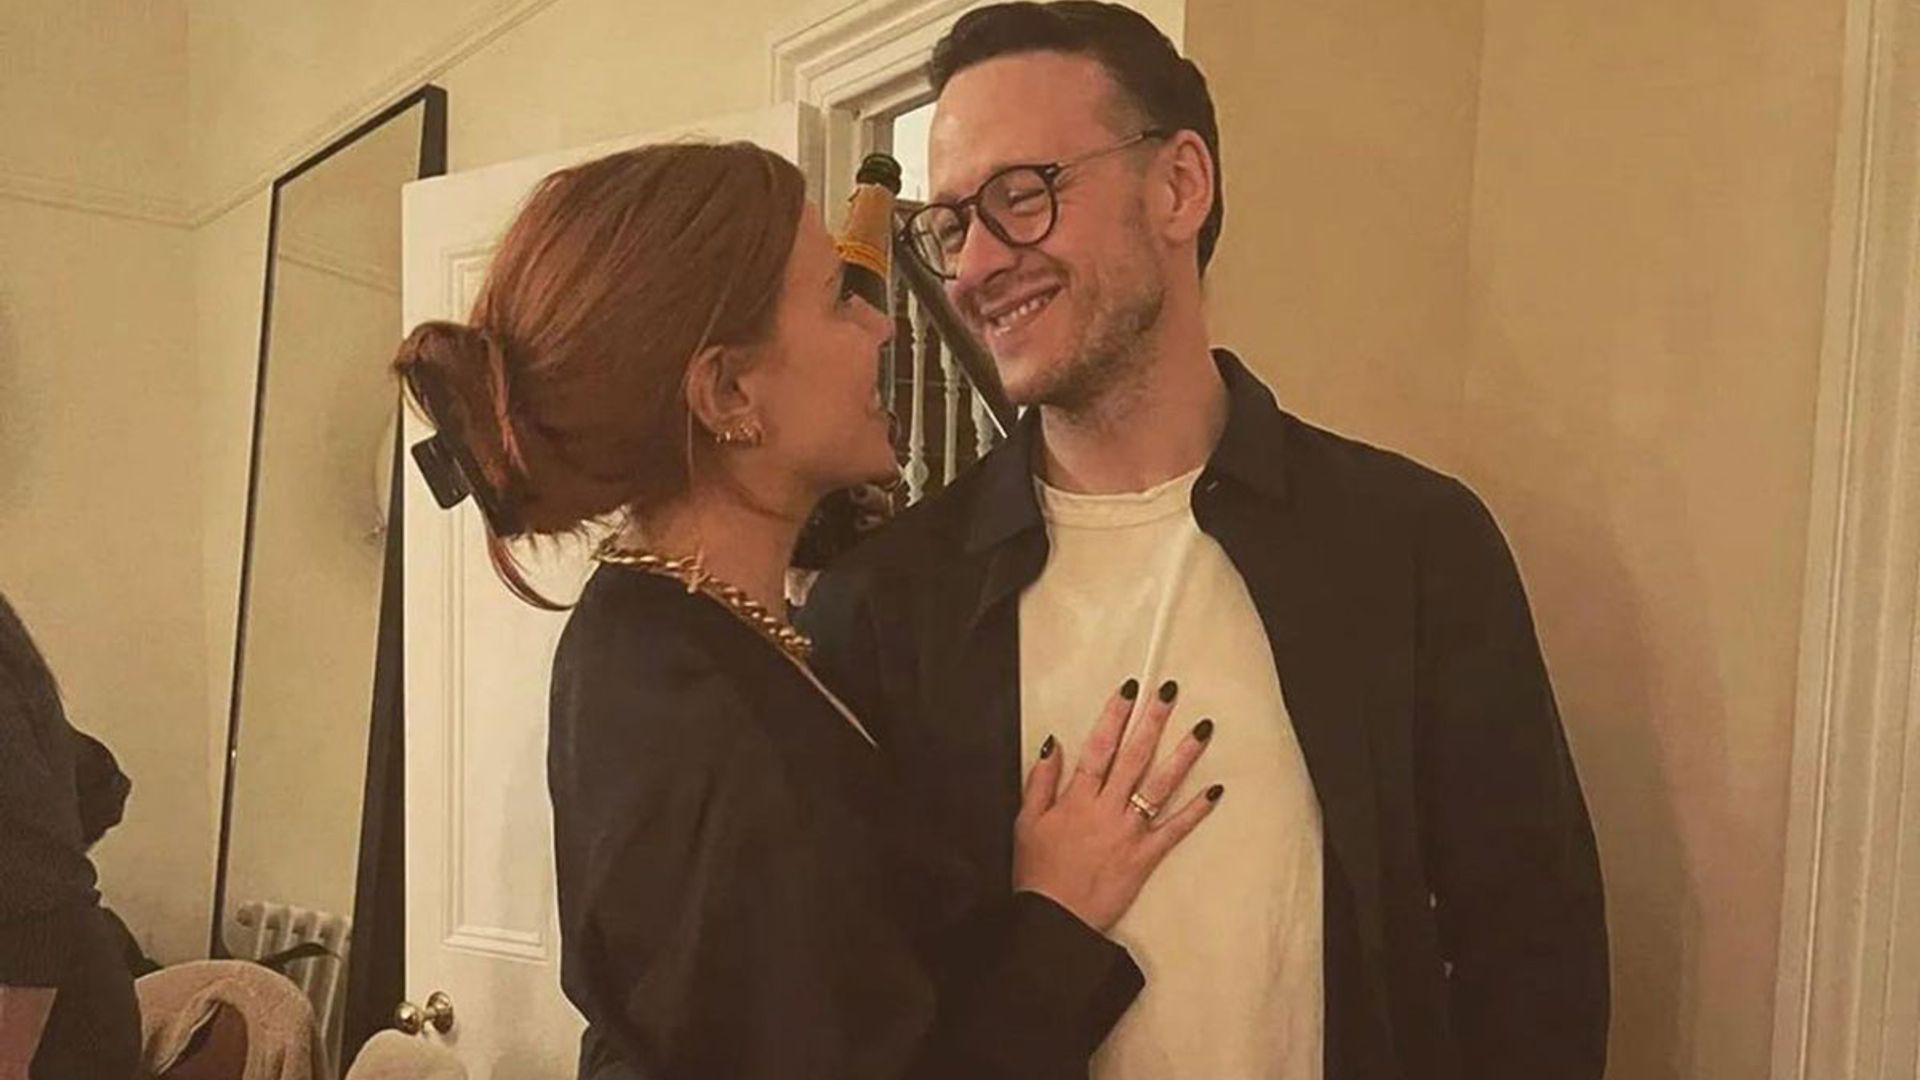 stacey and kevin clifton